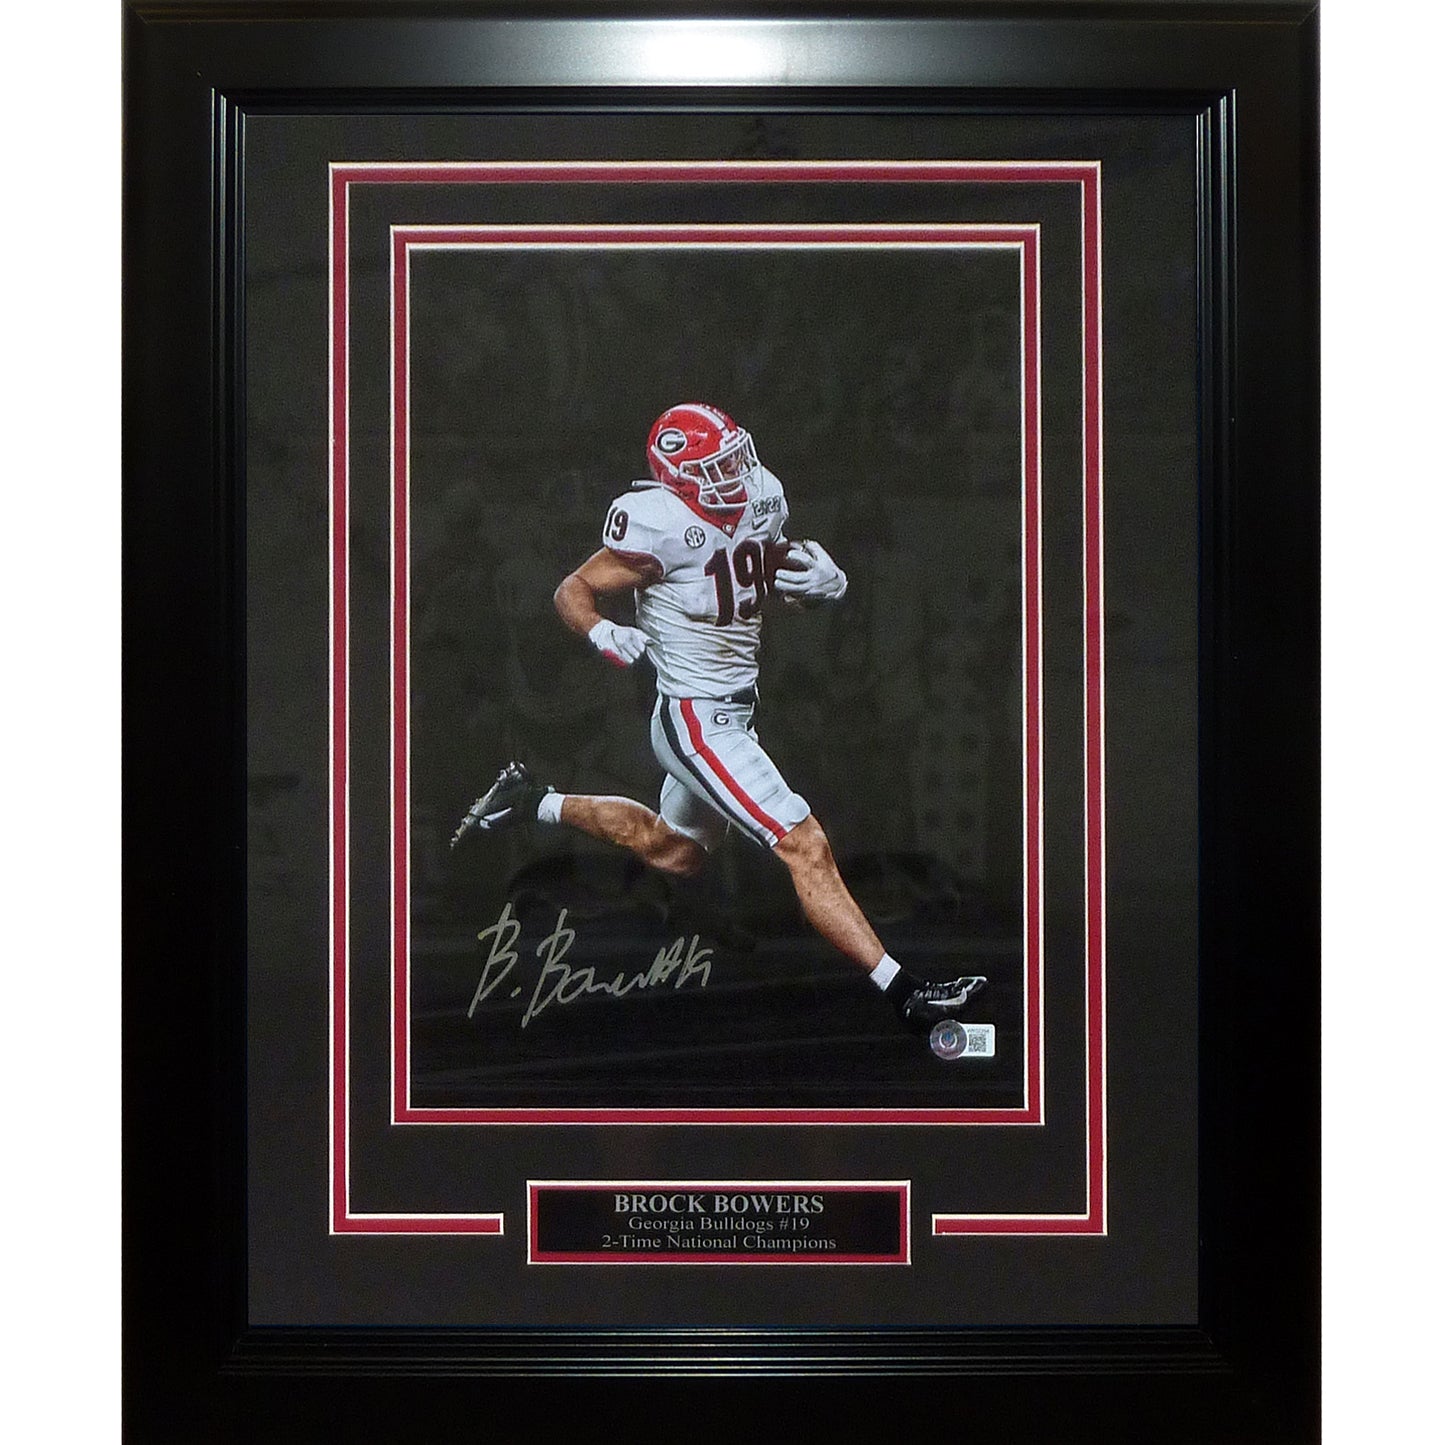 Brock Bowers Autographed Georgia Bulldogs Deluxe Framed 11x14 Photo - Beckett